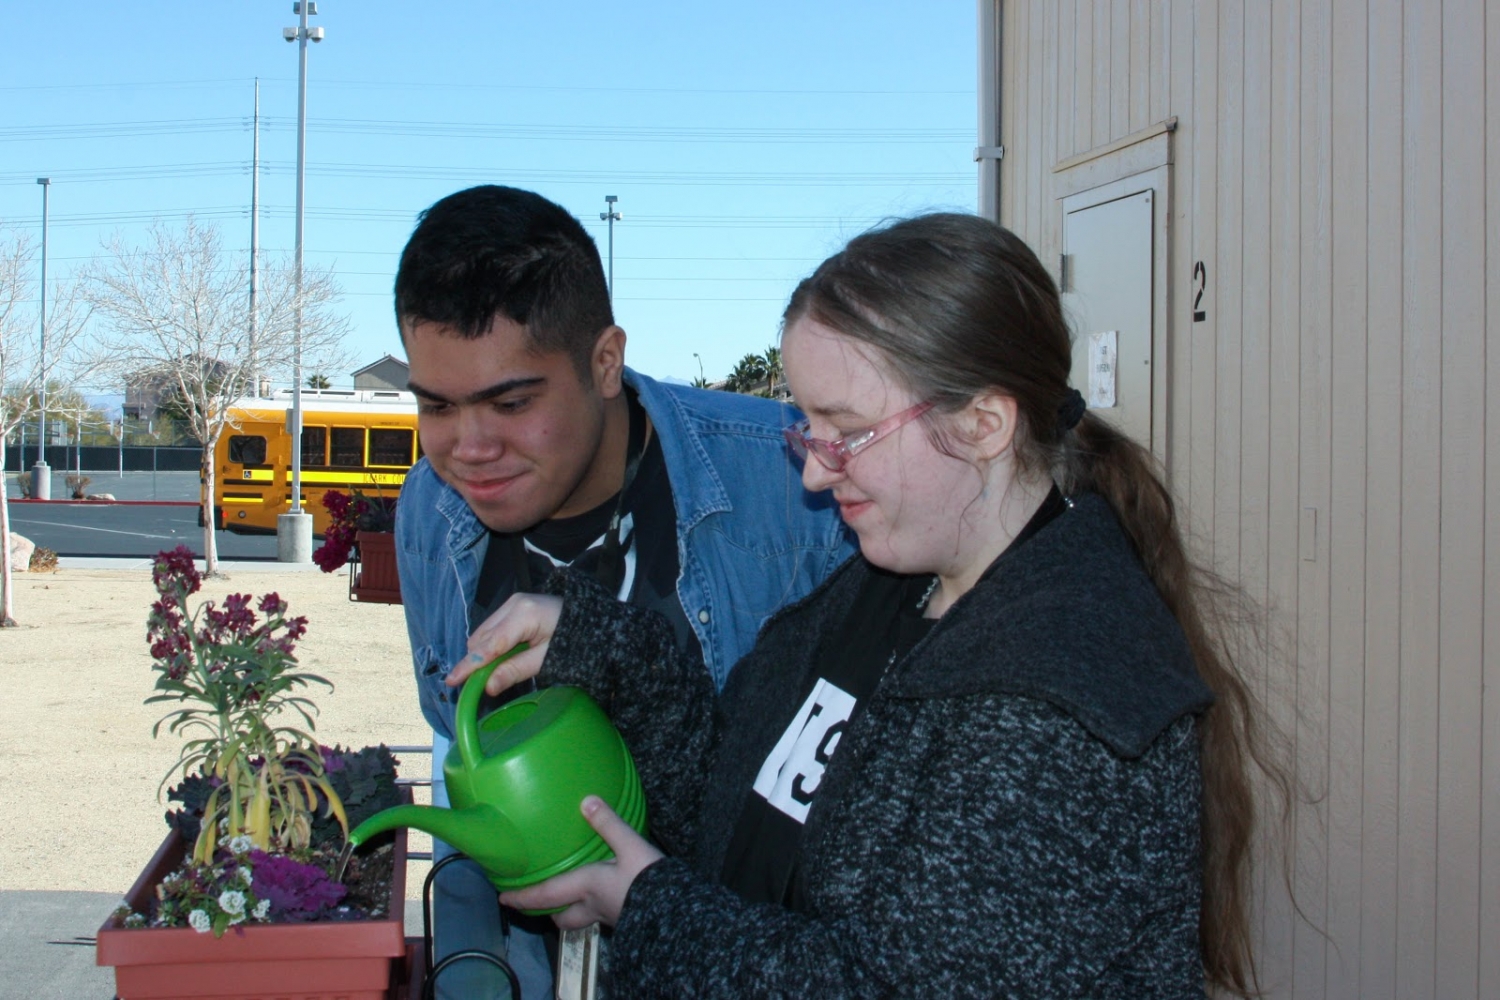 POST/PACE students continue practicing life skills on campus